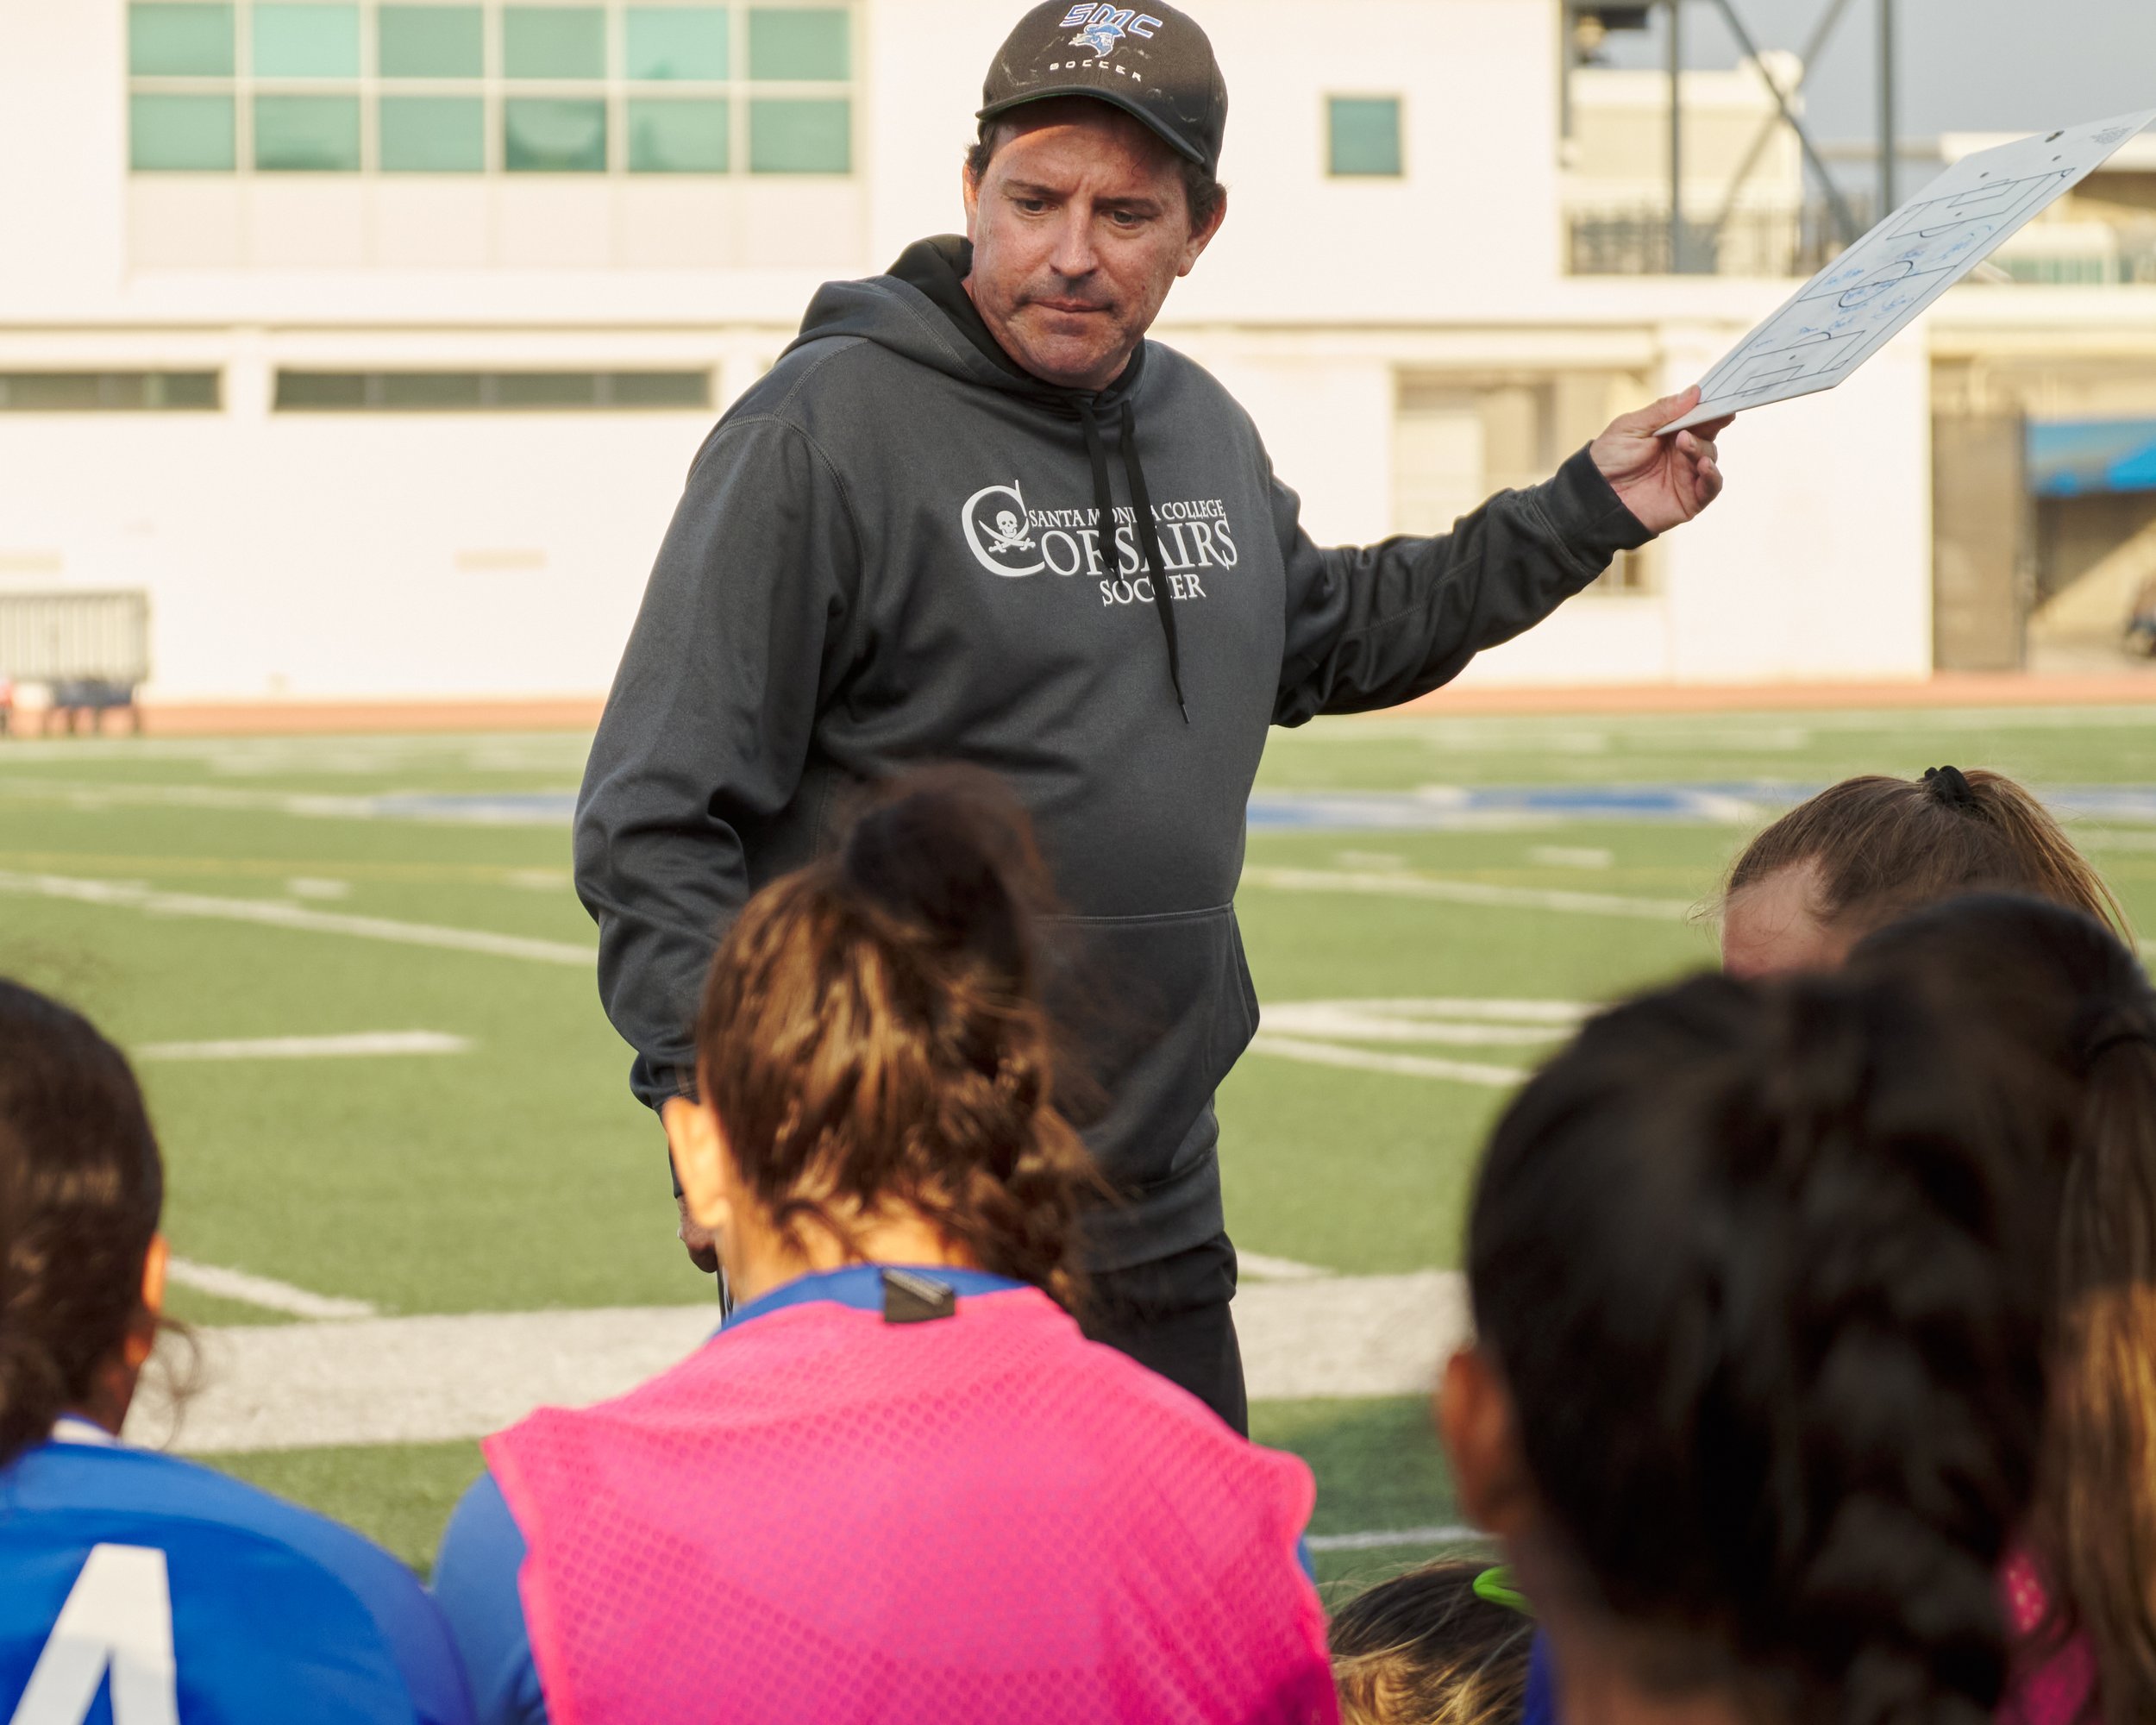  Santa Monica College Corsairs Women's Soccer Head Coach Aaron Benditson talks to the team during the women's soccer match against the Antelope Valley Marauders on Tuesday, Oct. 11, 2022, at Corsair Field in Santa Monica, Calif. The Corsairs lost 6-0